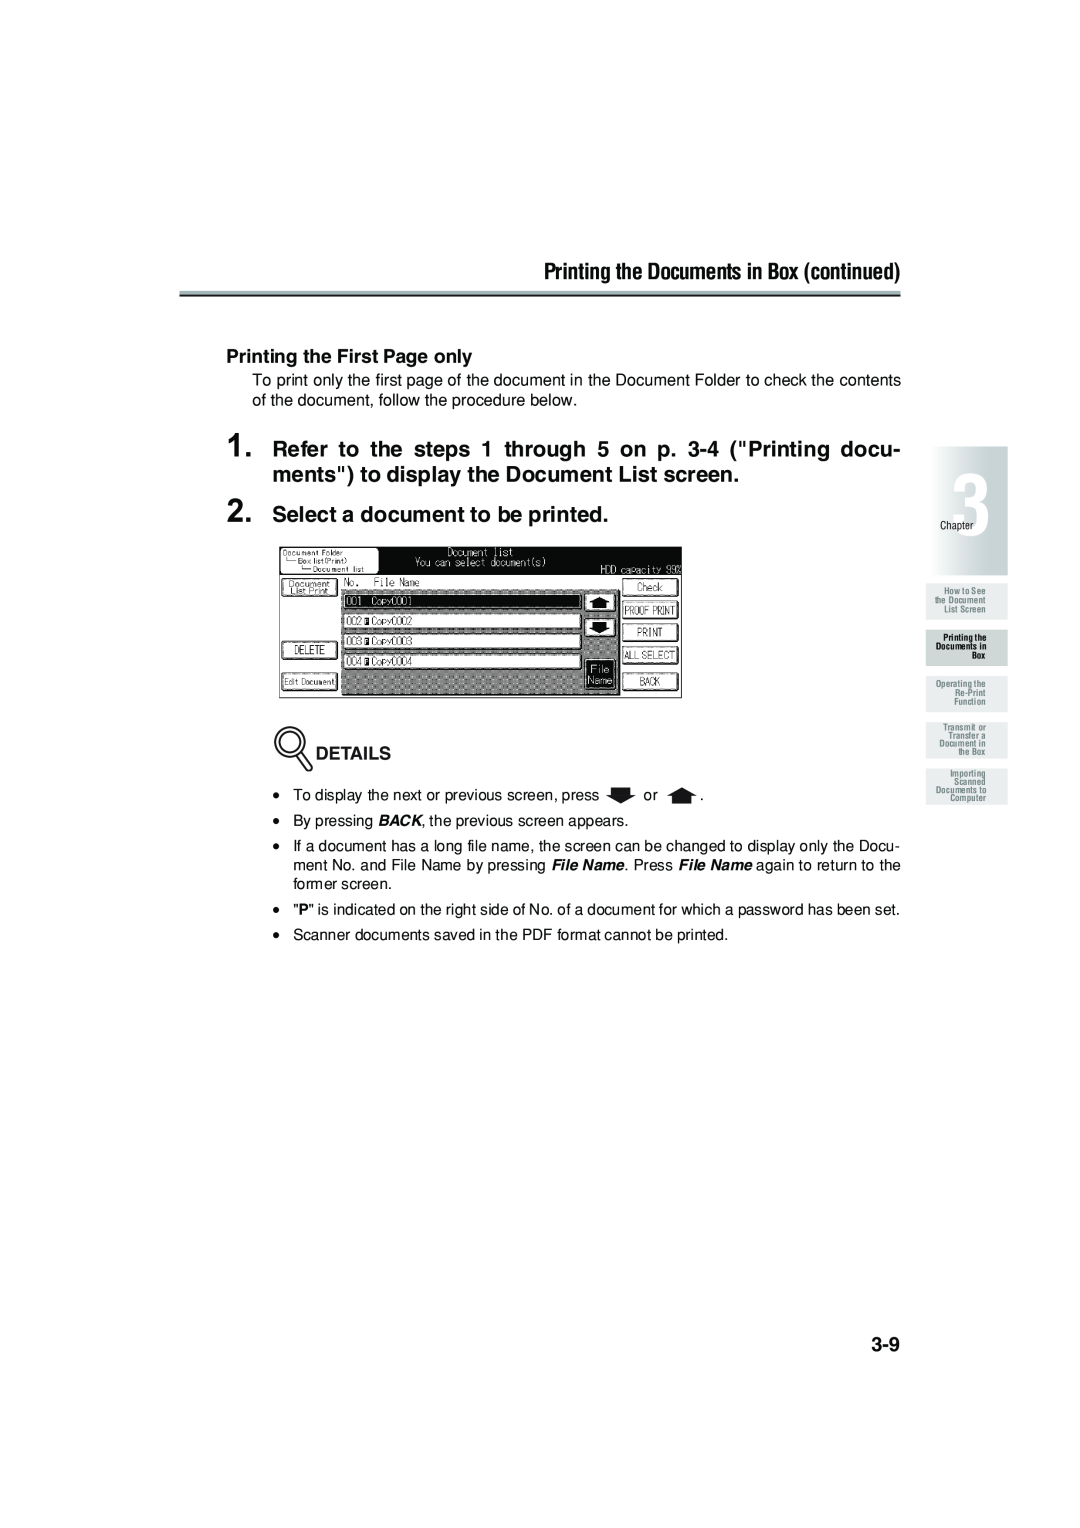 Konica Minolta 7222 manual Refer to the steps 1 through, on p. 3-4 Printing docu, ments to display the Document List screen 